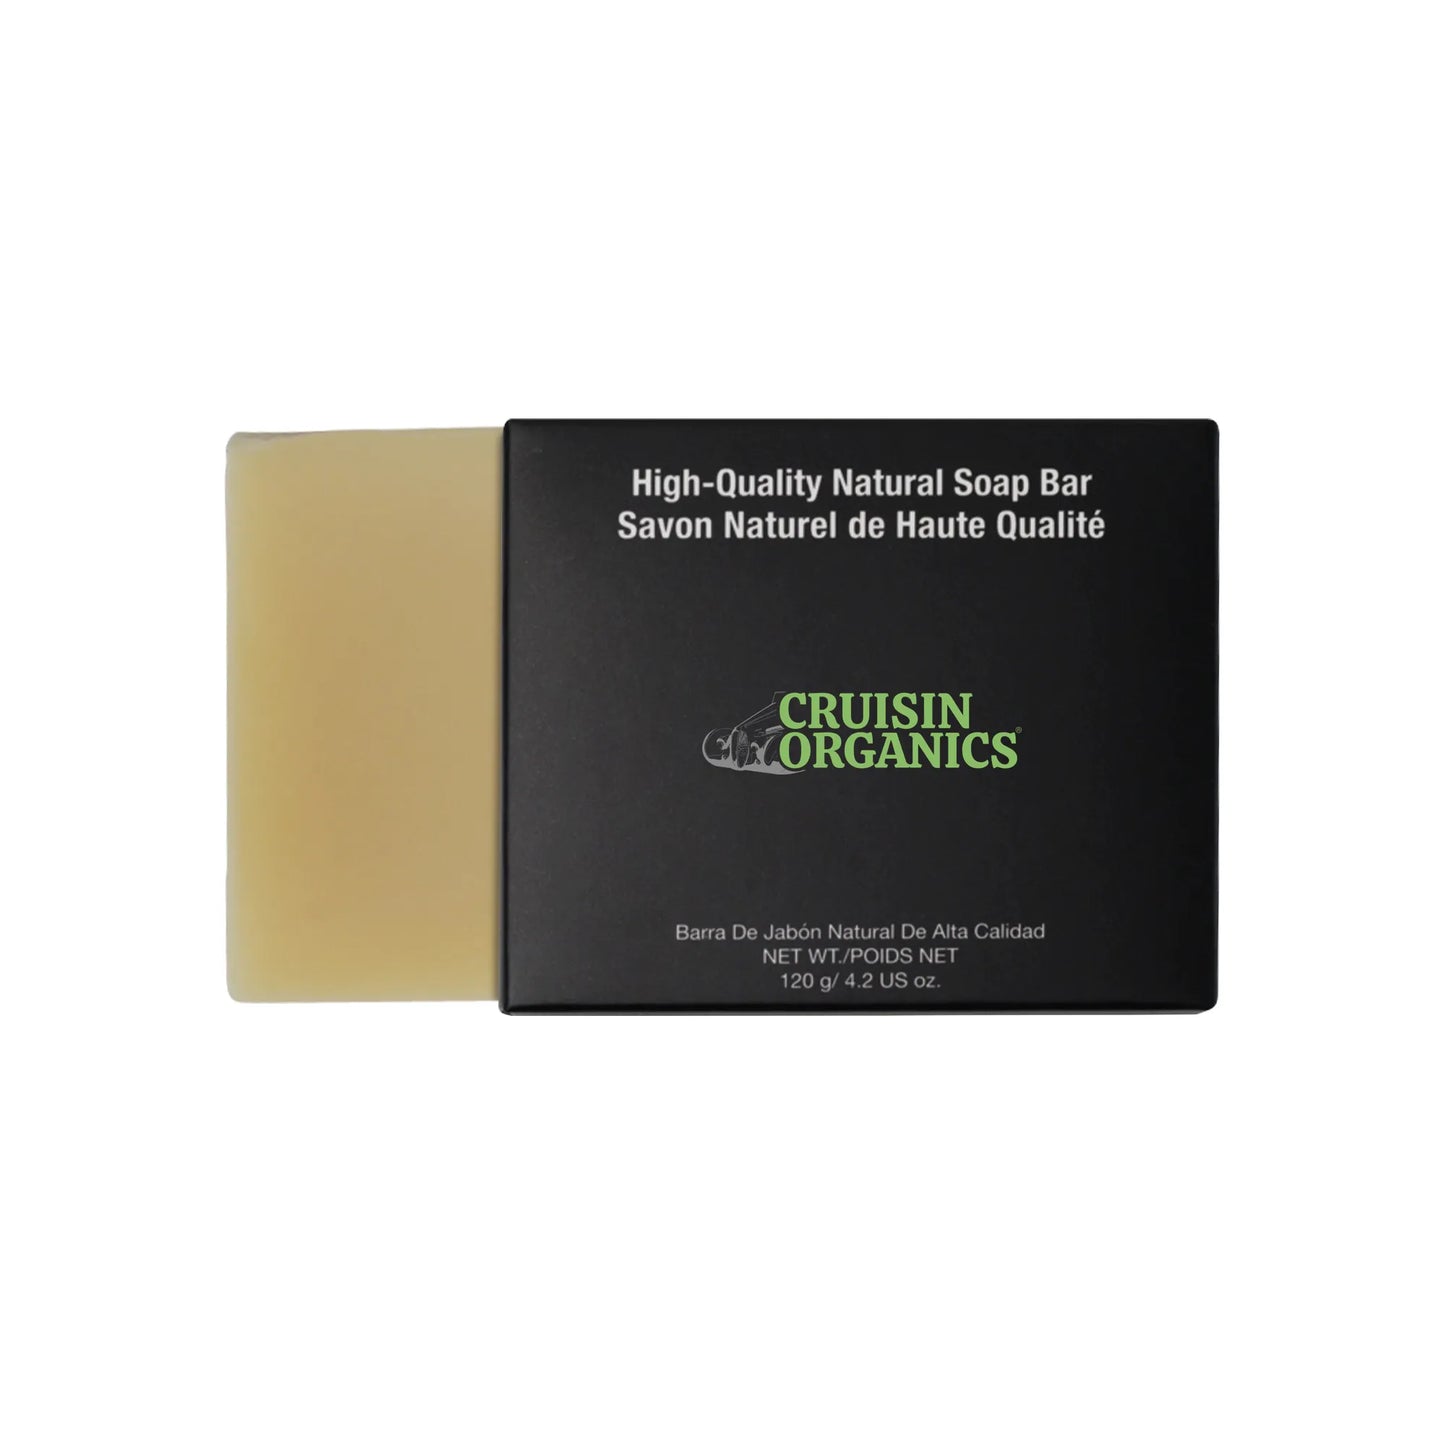  The classic soap bar for the timeless you—this natural organic coconutty soap bar is essential to your daily routine. With the organic coconut oil, your skin will feel soft and healed, helping it recover from dry, damaged skin. With the right mix of shea butter and goat milk, this soap bar is rich in proteins, vitamins, and minerals to naturally exfoliate and lather your skin in luxury. Benefits